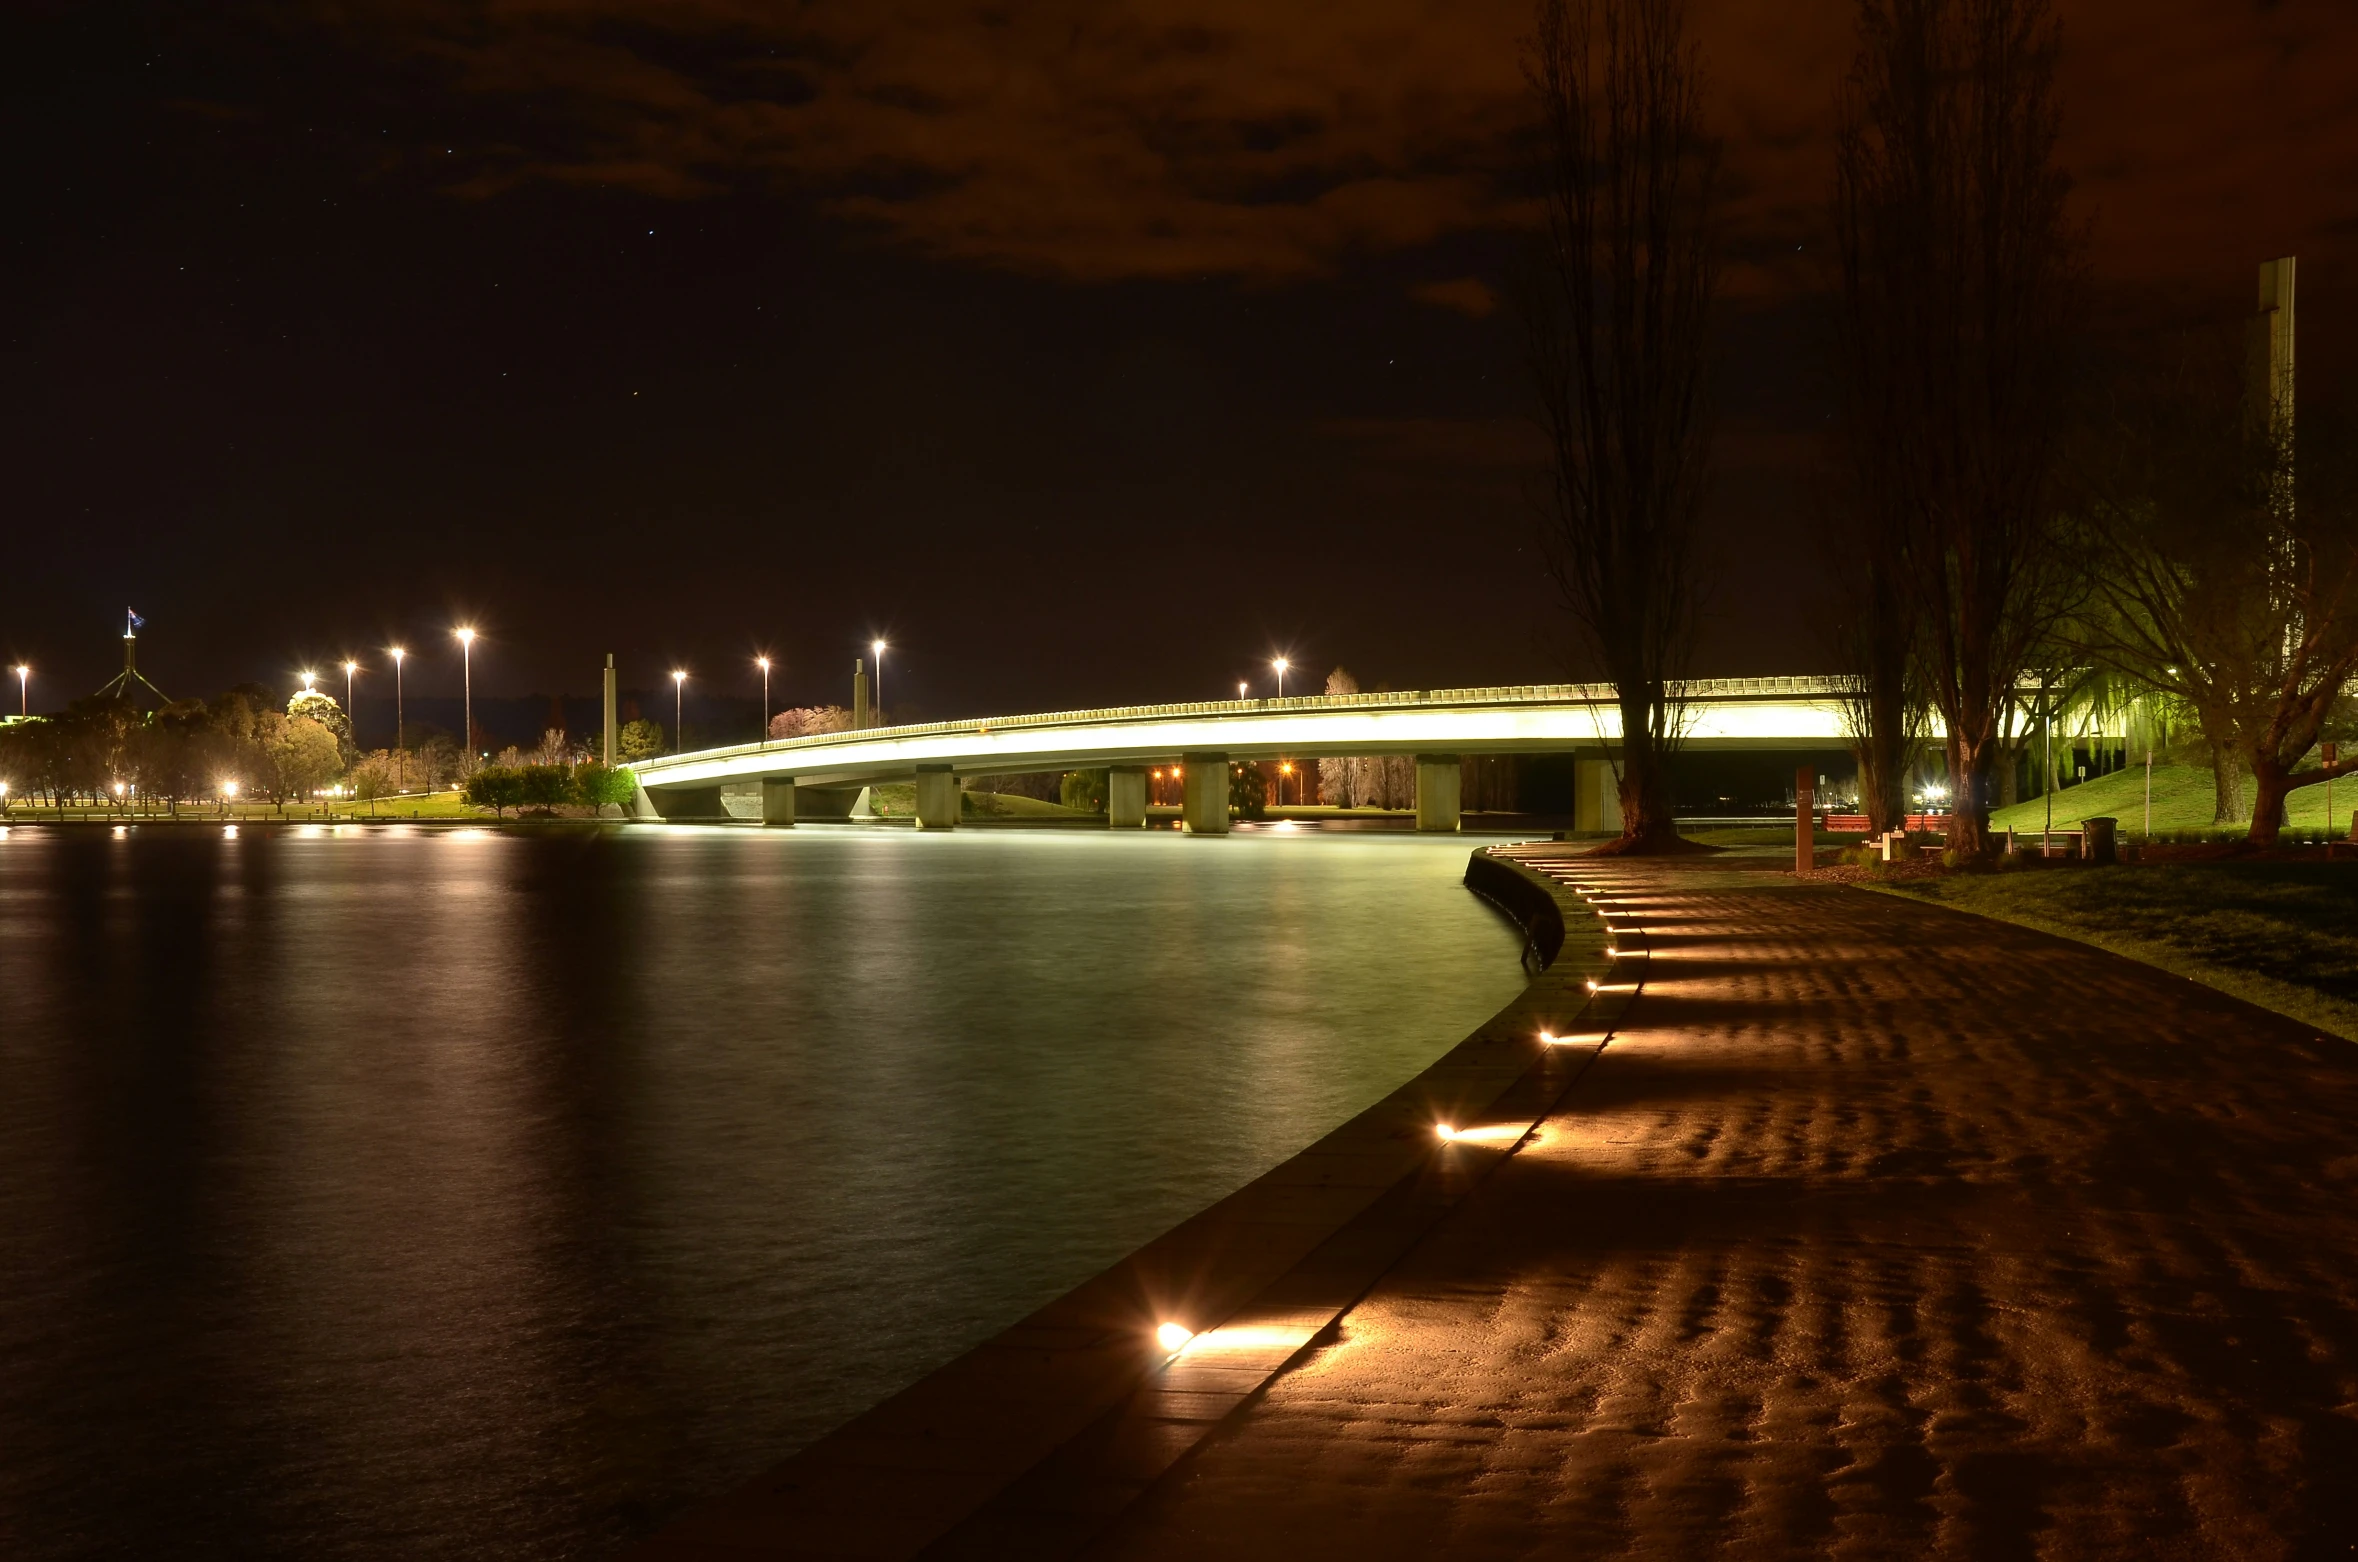 benches sitting on the water edge with city lights